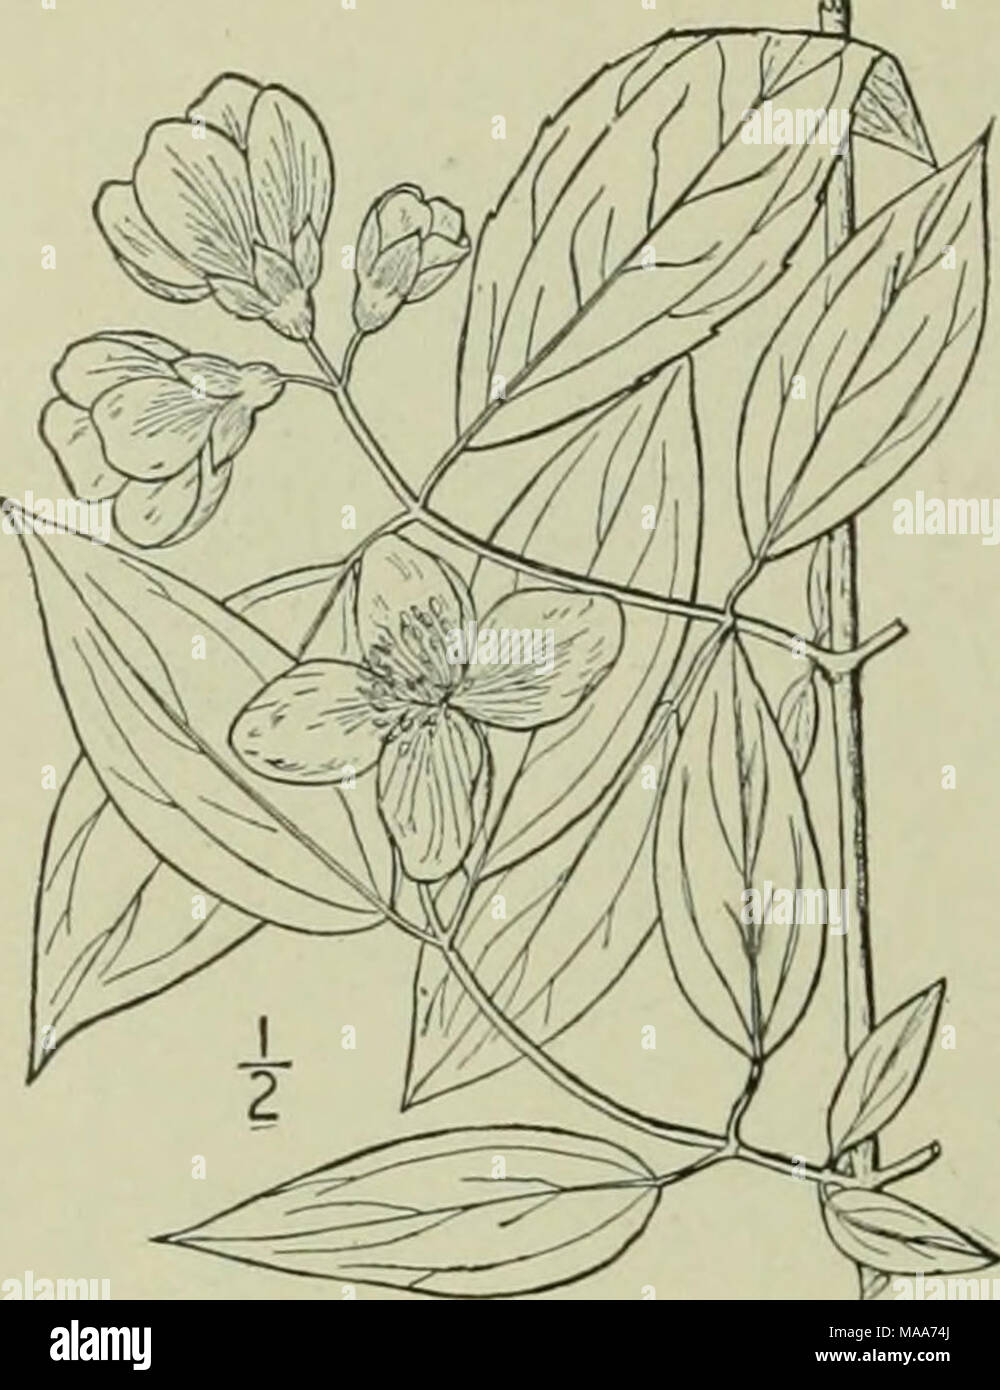 . An illustrated flora of the northern United States, Canada and the British possessions : from Newfoundland to the parallel of the southern boundary of Virginia and from the Atlantic Ocean westward to the 102nd meridian . I. Philadelphus inodorus L. Scentless Syringa. Fig. 2189. Philadelphus inodorus L. Sp. PI. 470. 1803. A shrub, 6°-8° high, glabrous or very nearly so throughout. Leaves ovate or oval, acute or acu- minate at the apex, rounded or sometimes nar- rowed at the base, 2-5' long, strongly 3-nerved, serrate with small distant teeth, or entire; flow- ers white, inodorous, about l' br Stock Photo